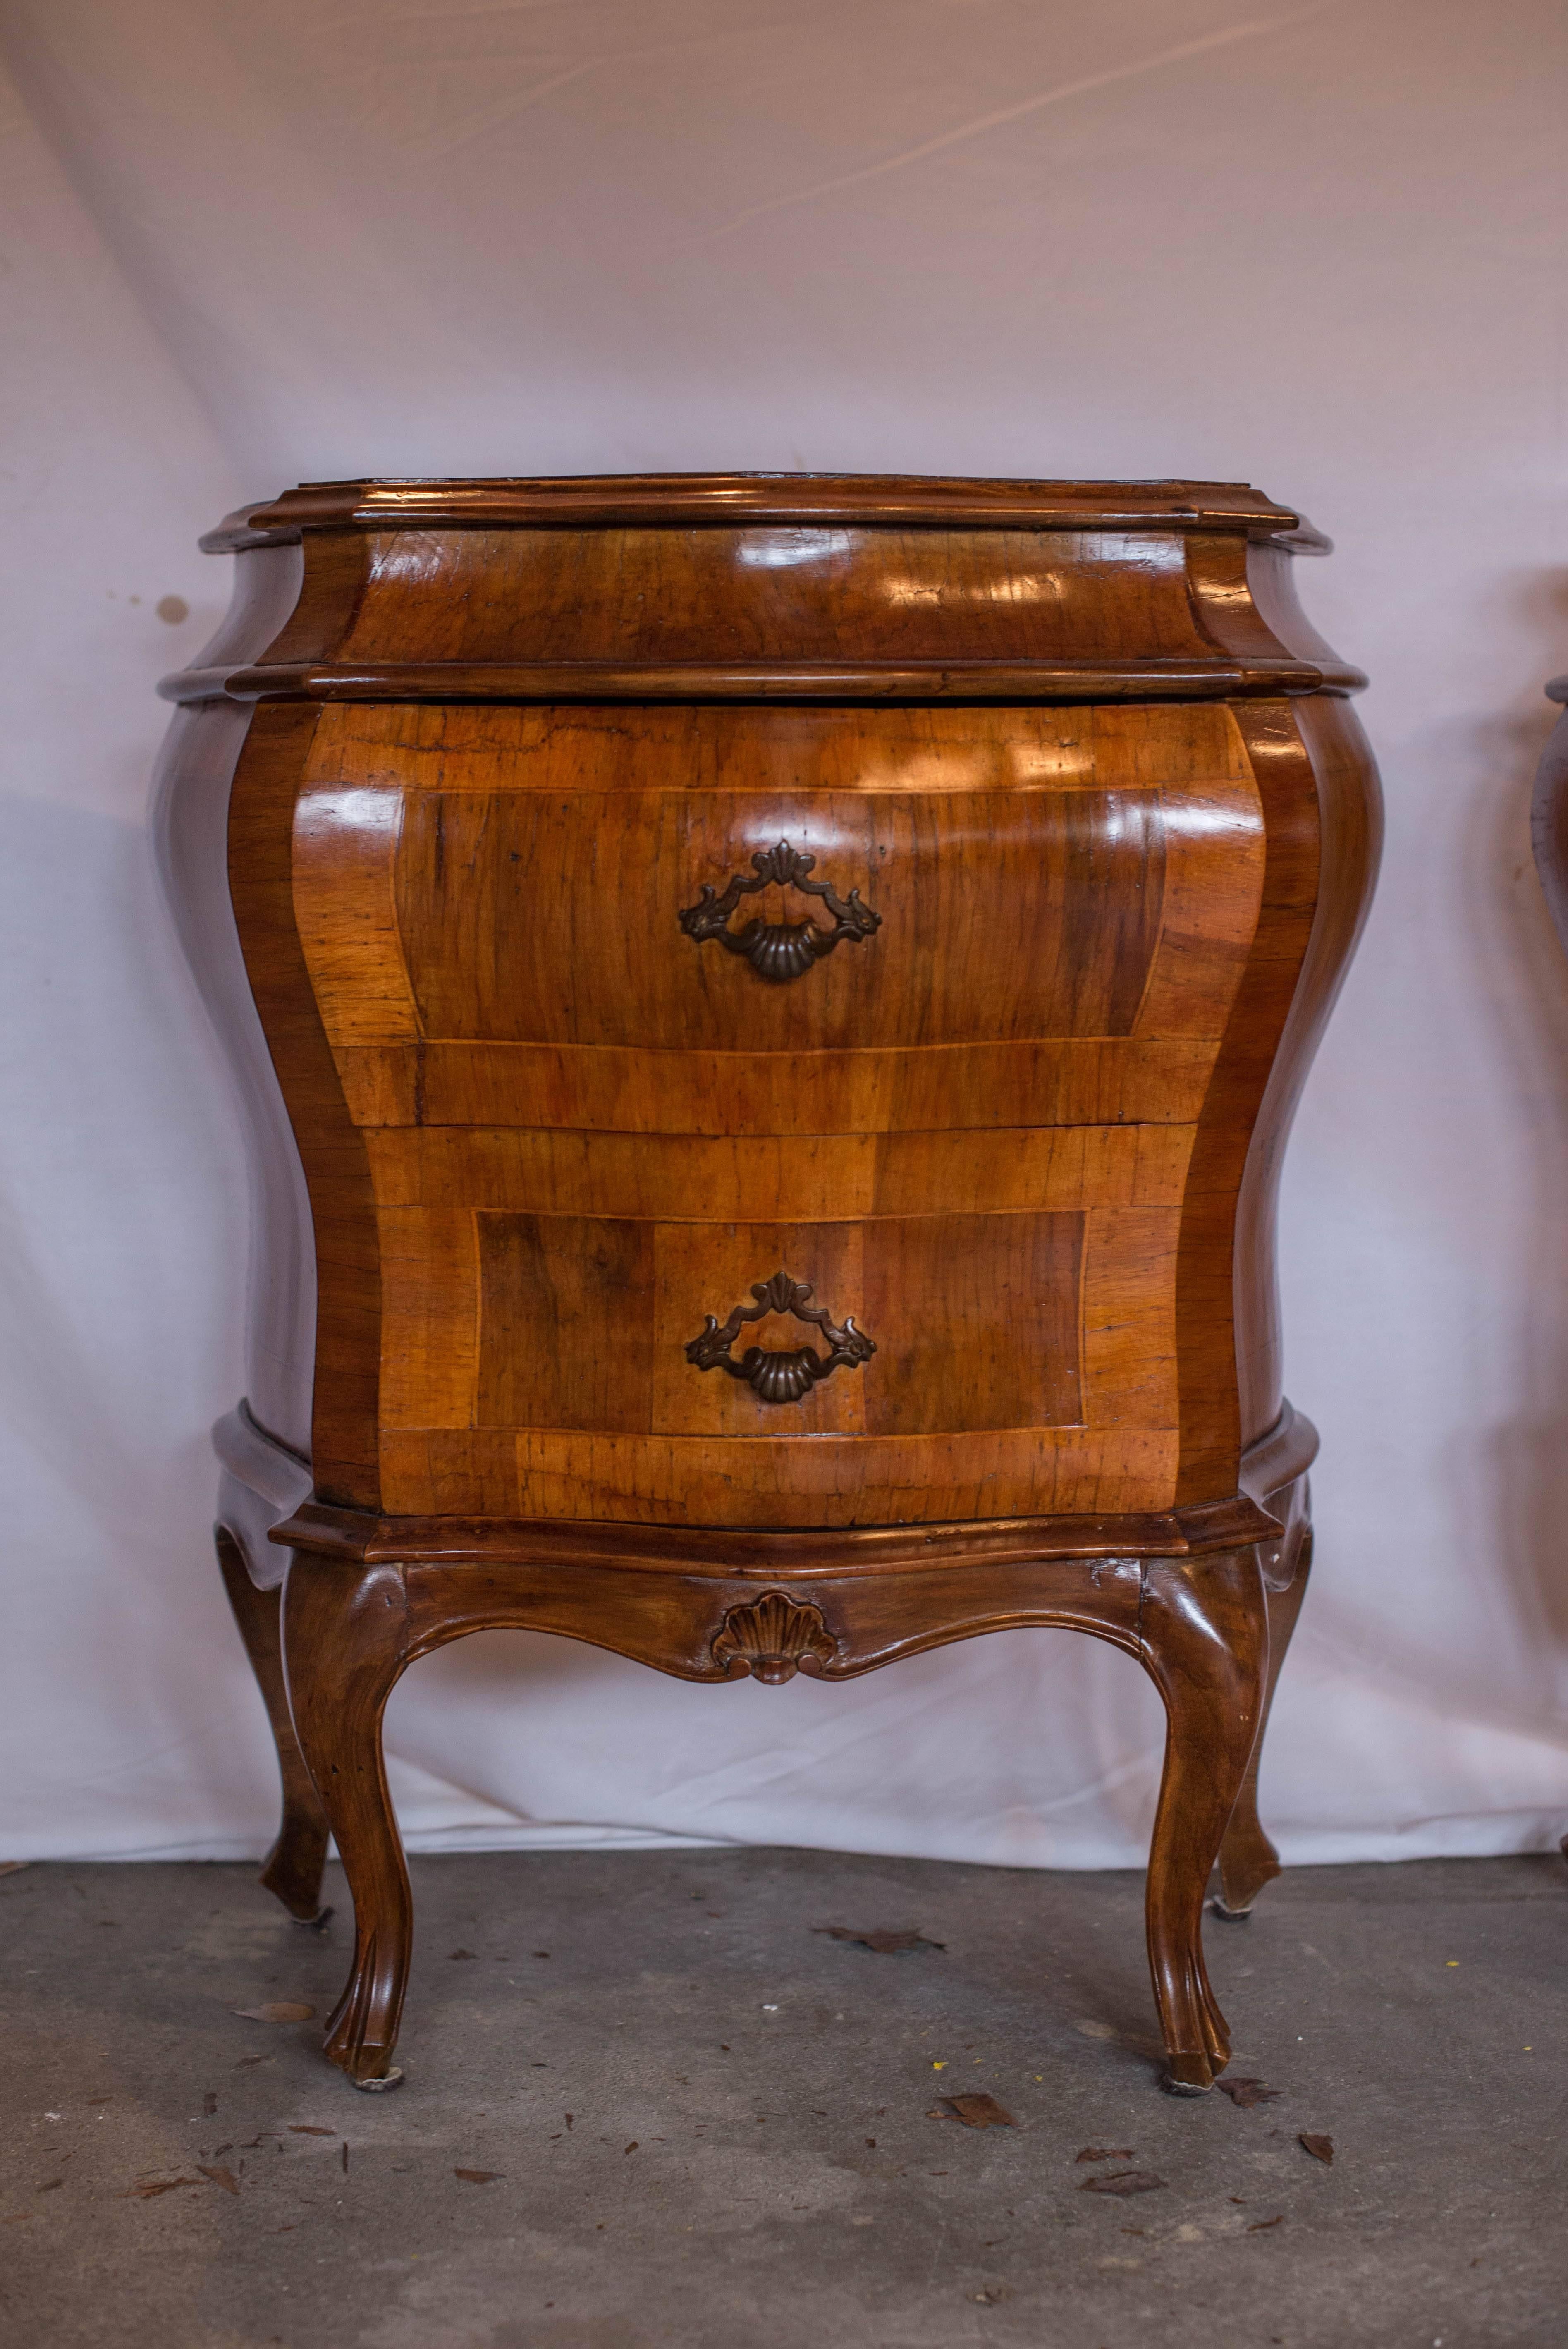 This pair of 20th century Italian Olive Wood Bombe two drawer commodes features beautiful inlay and a lovely shaped top.  The pulls are brass or bronze.